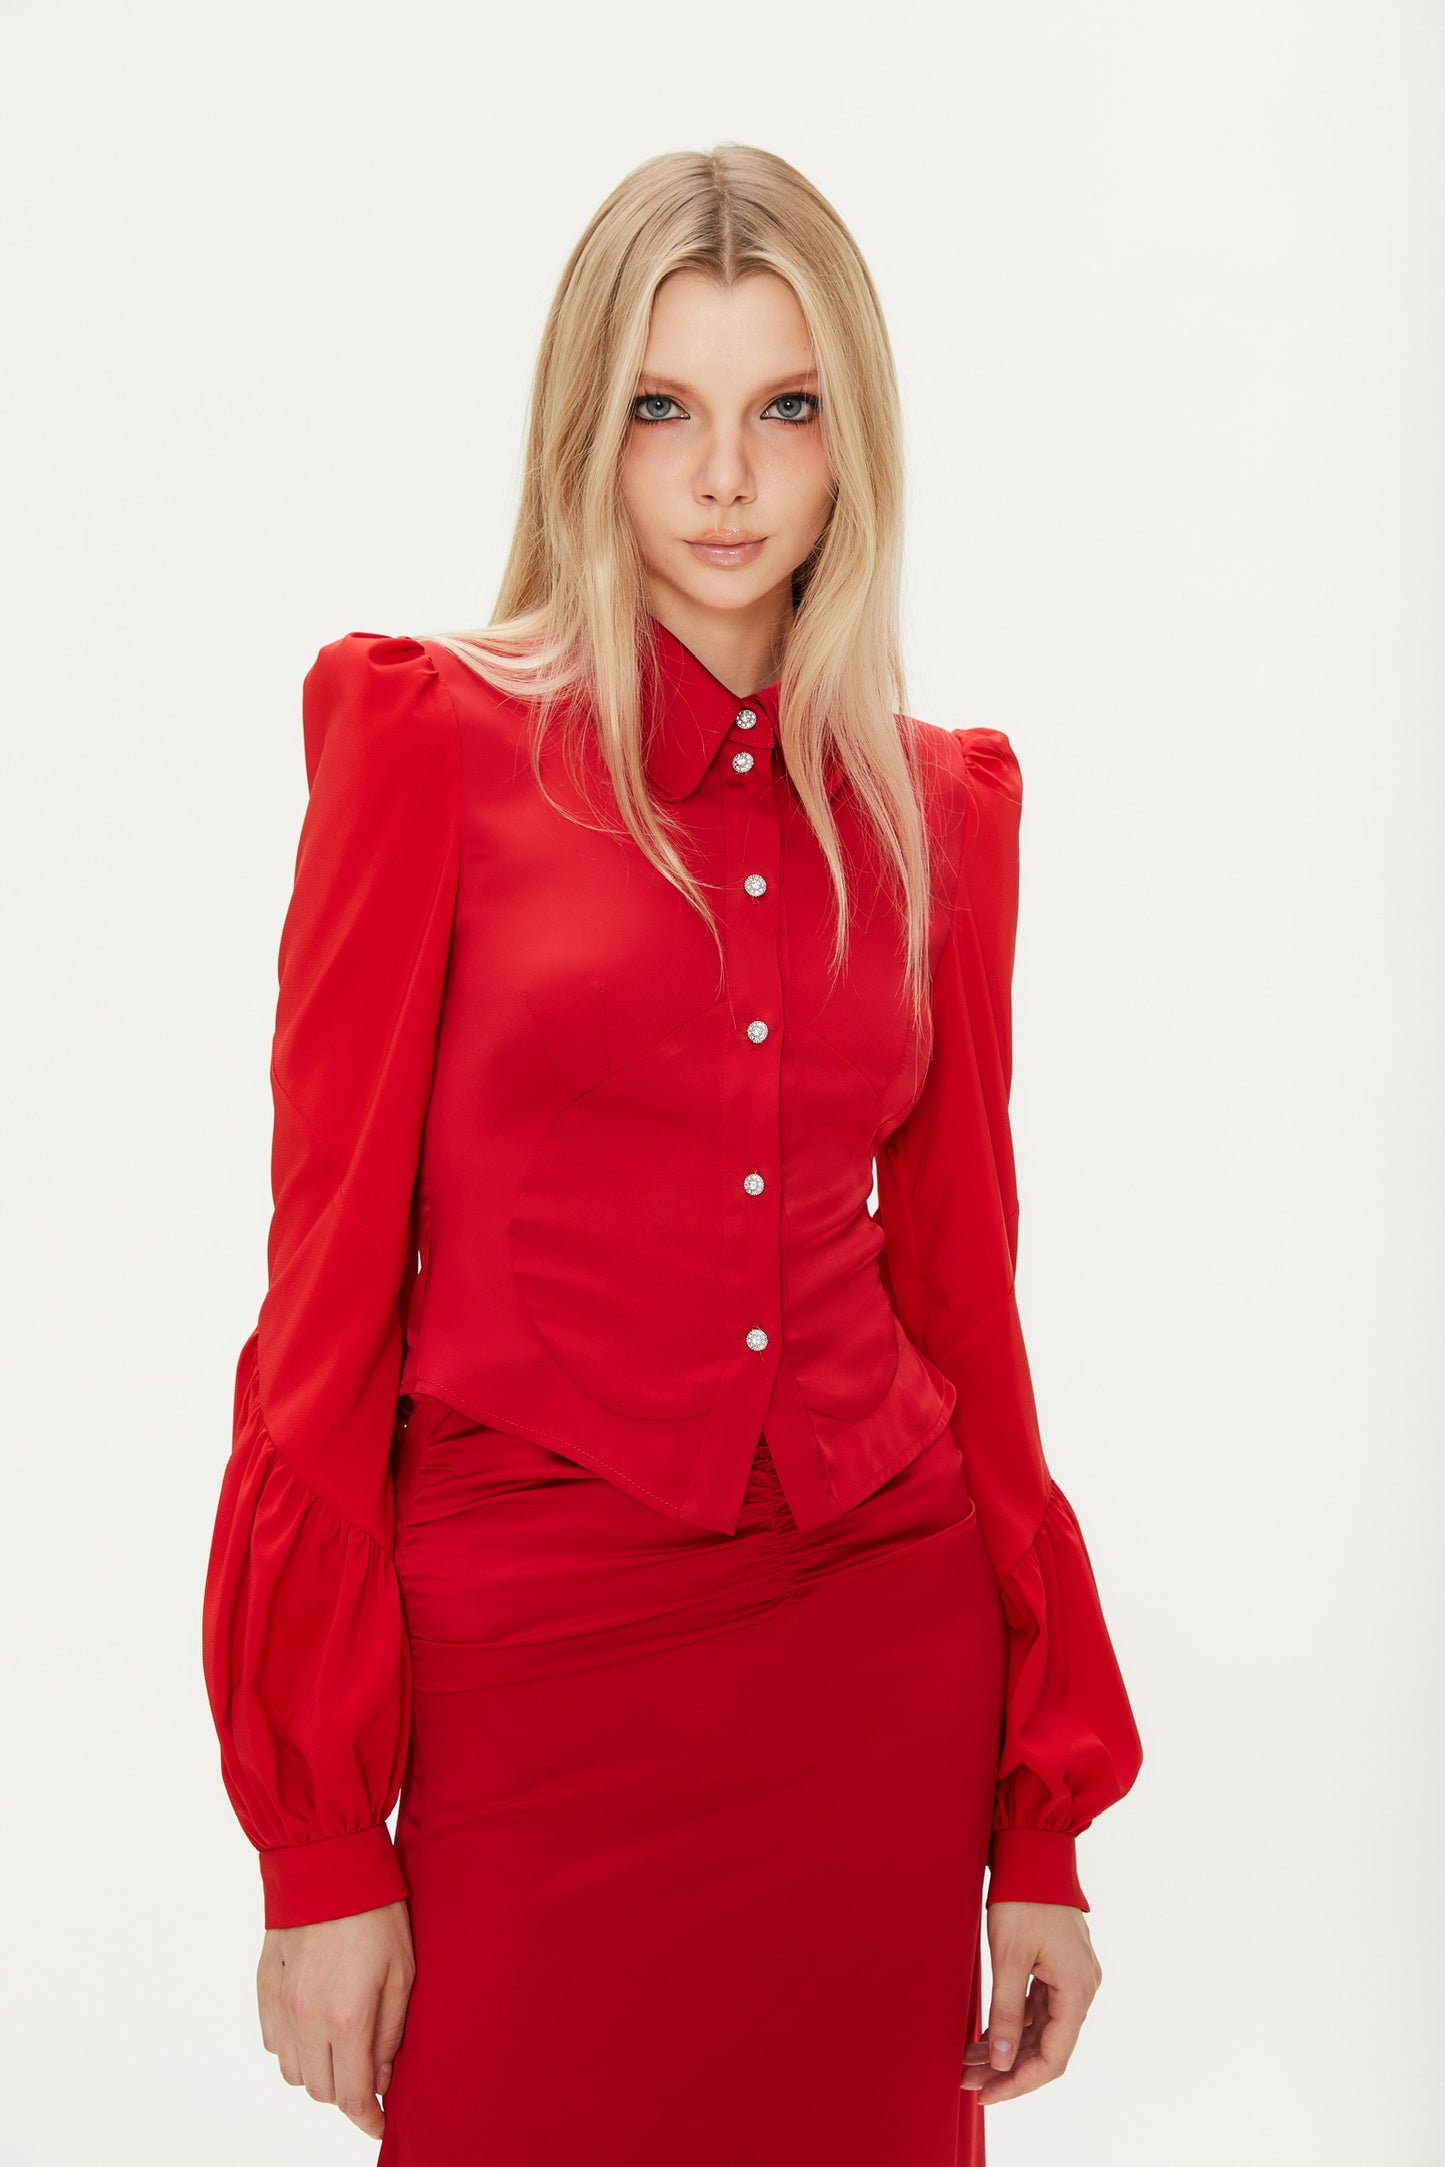 Ulia Love Heart Scoop Backless Blouse in Red